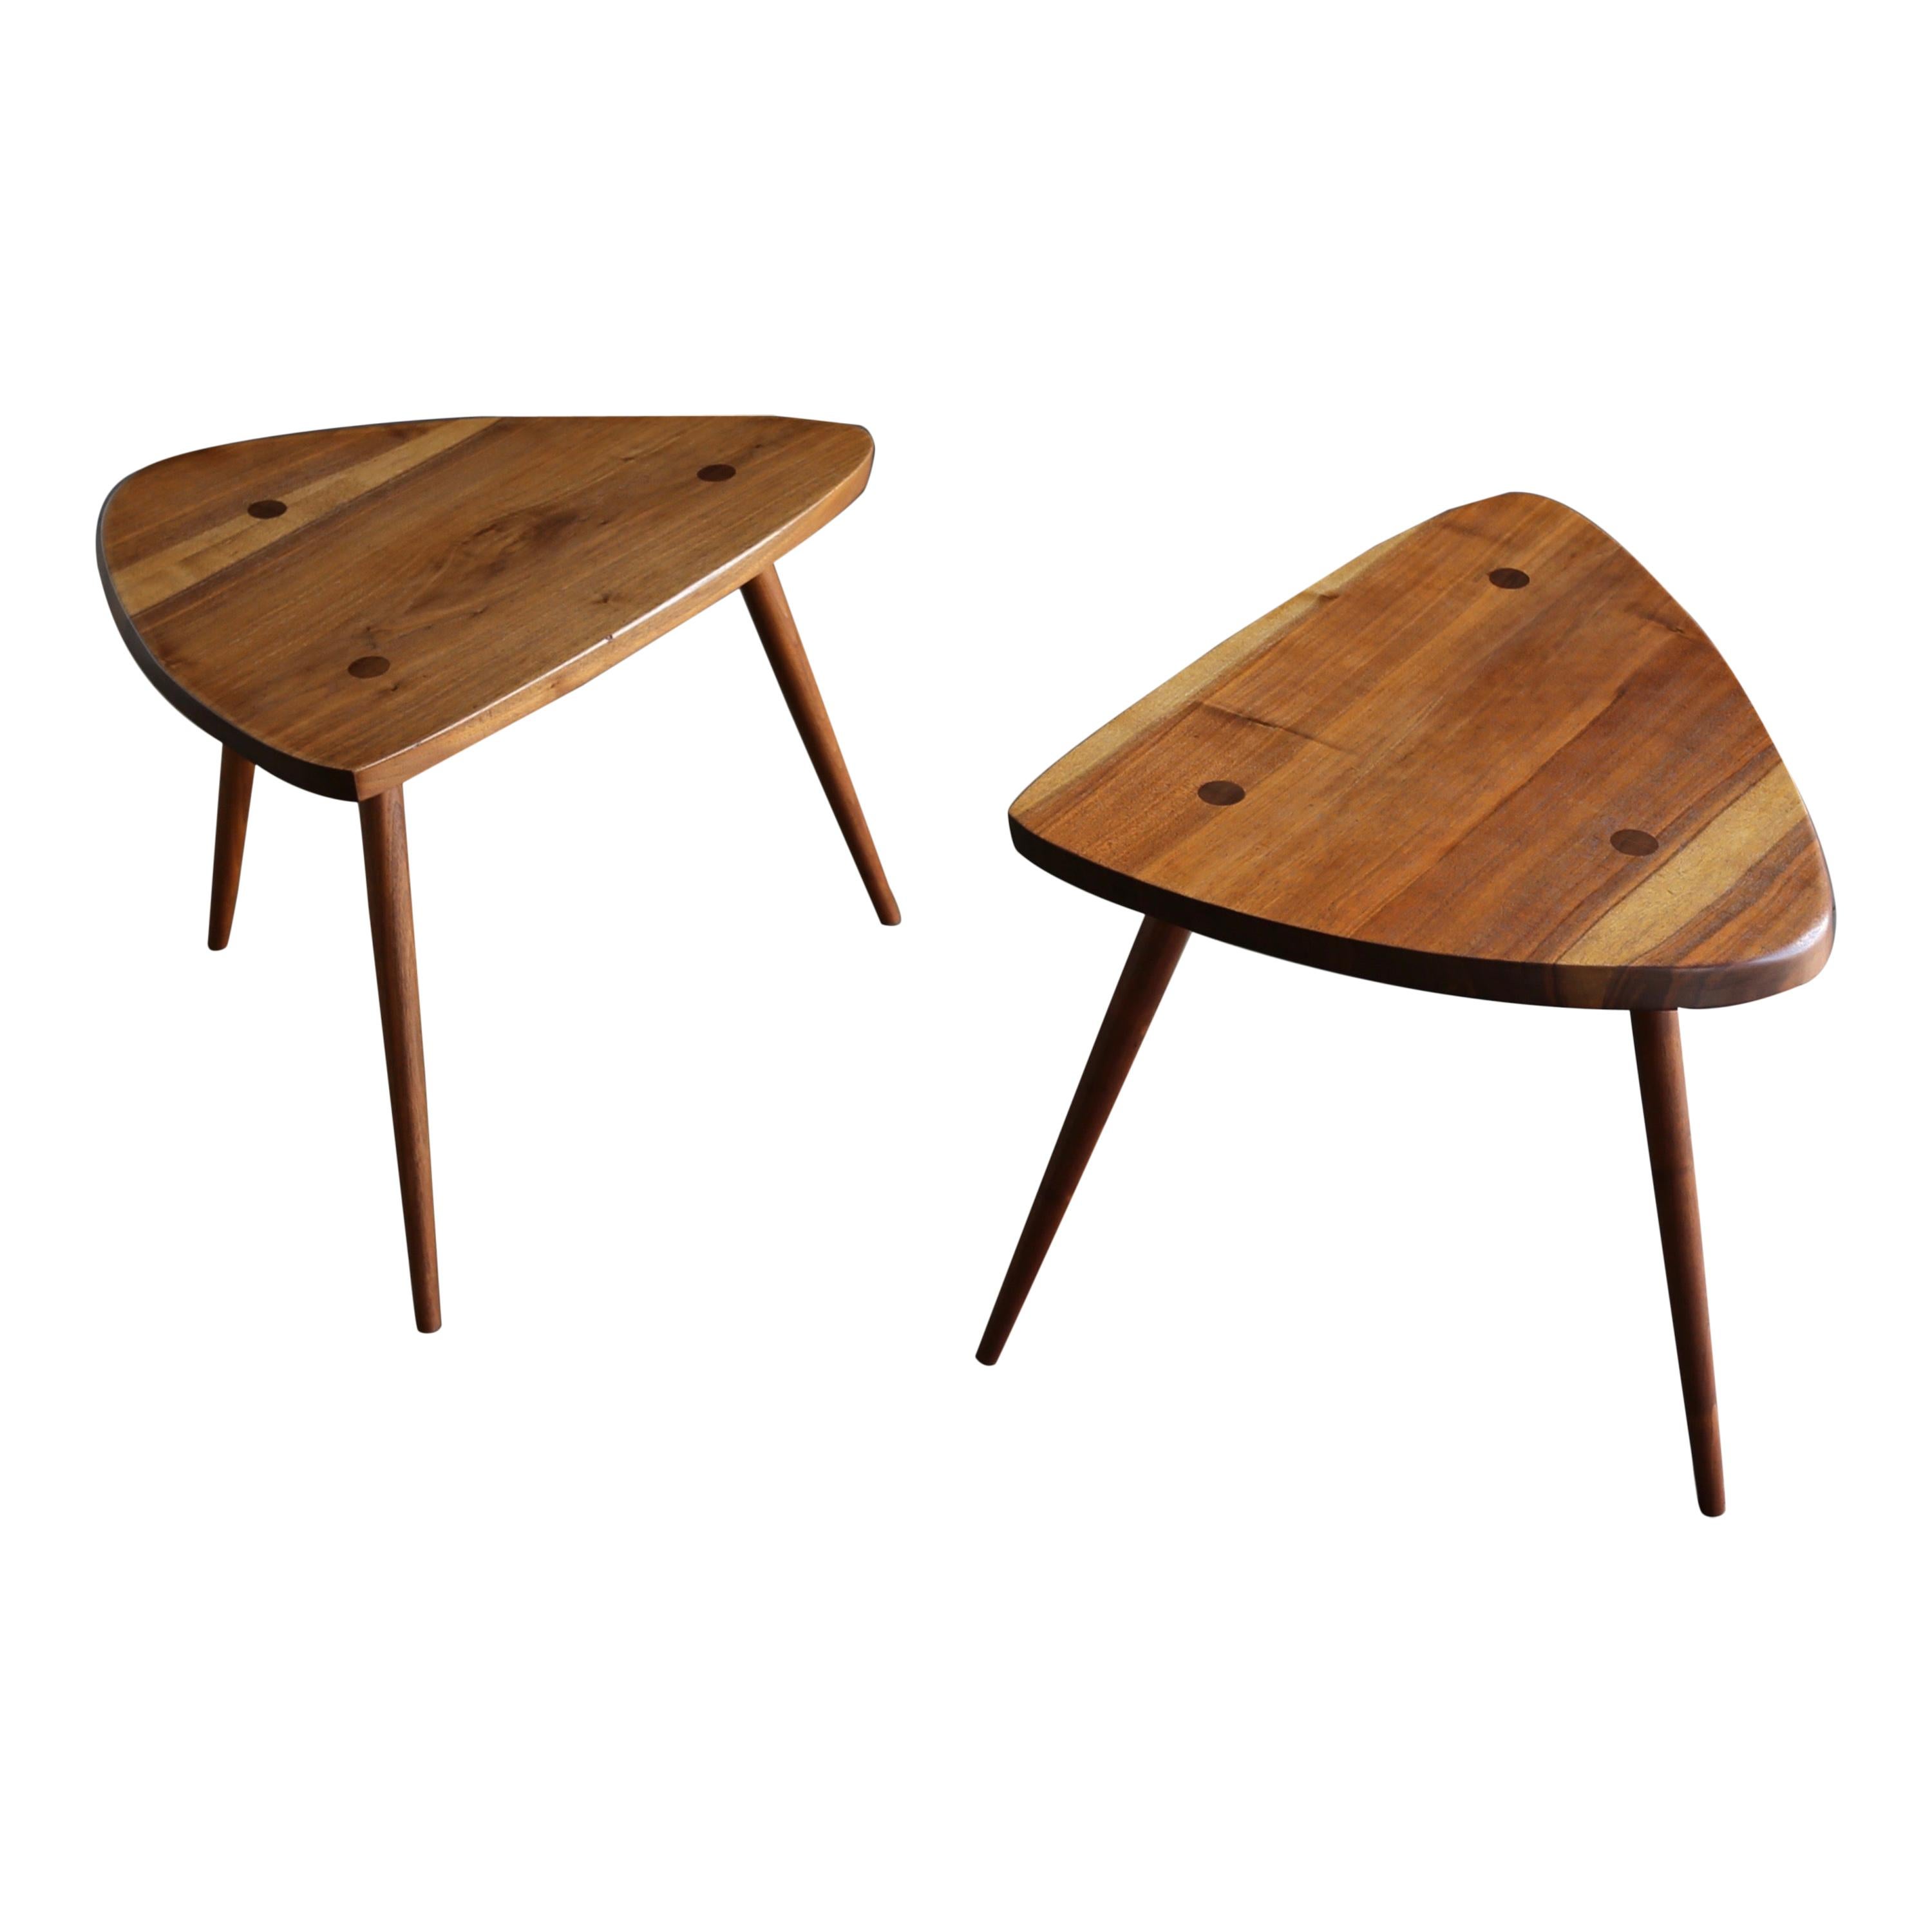 George Nakashima Handcrafted "Wohl" Occasional Tables, 1954 